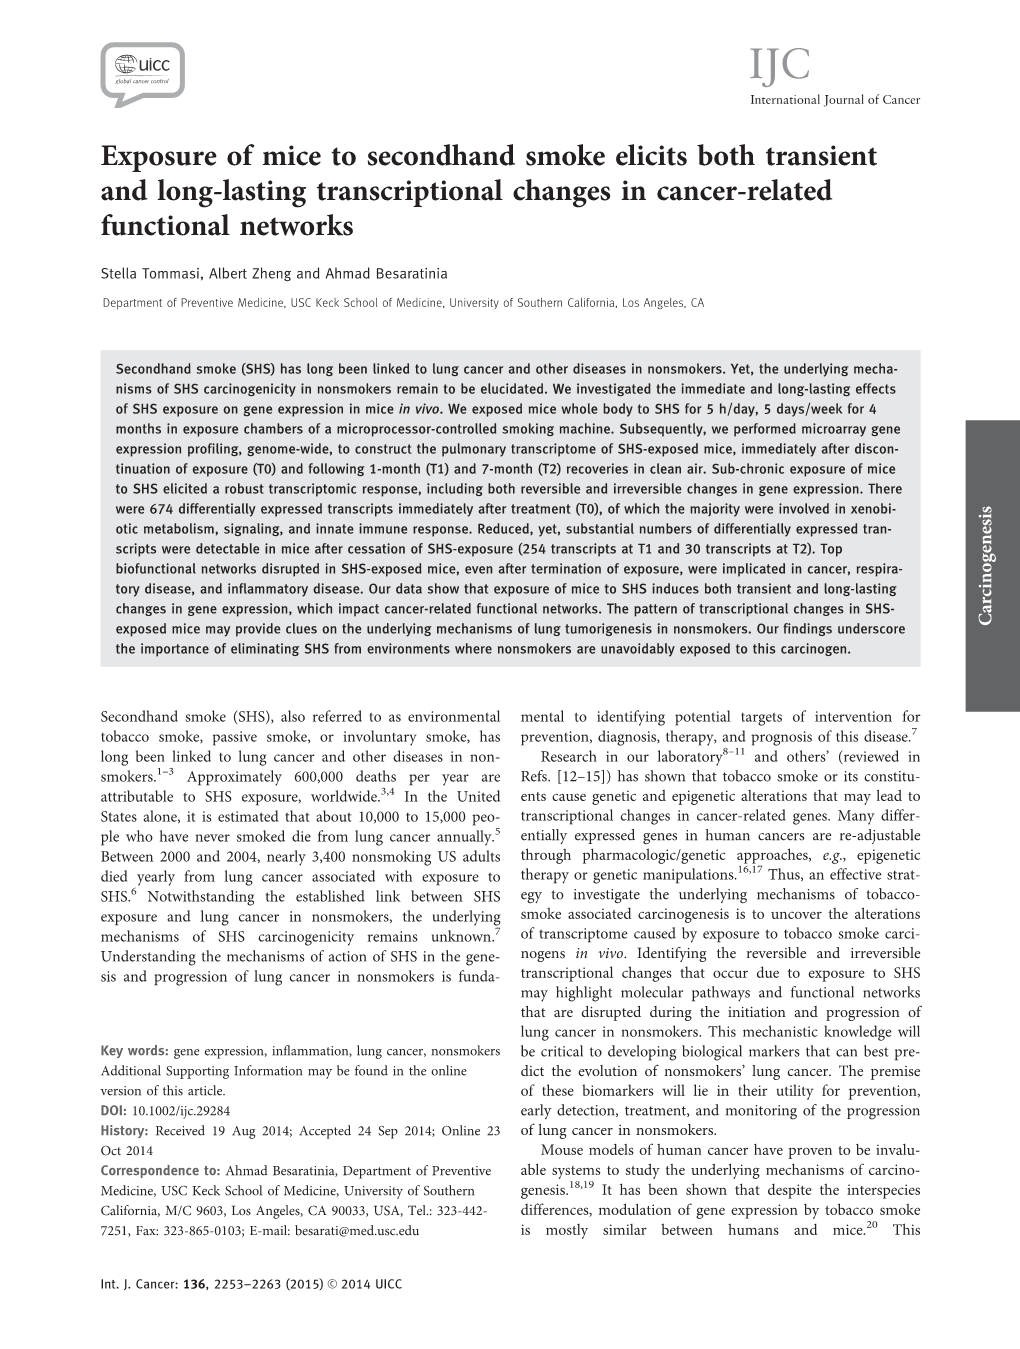 Exposure of Mice to Secondhand Smoke Elicits Both Transient and Long-Lasting Transcriptional Changes in Cancer-Related Functional Networks